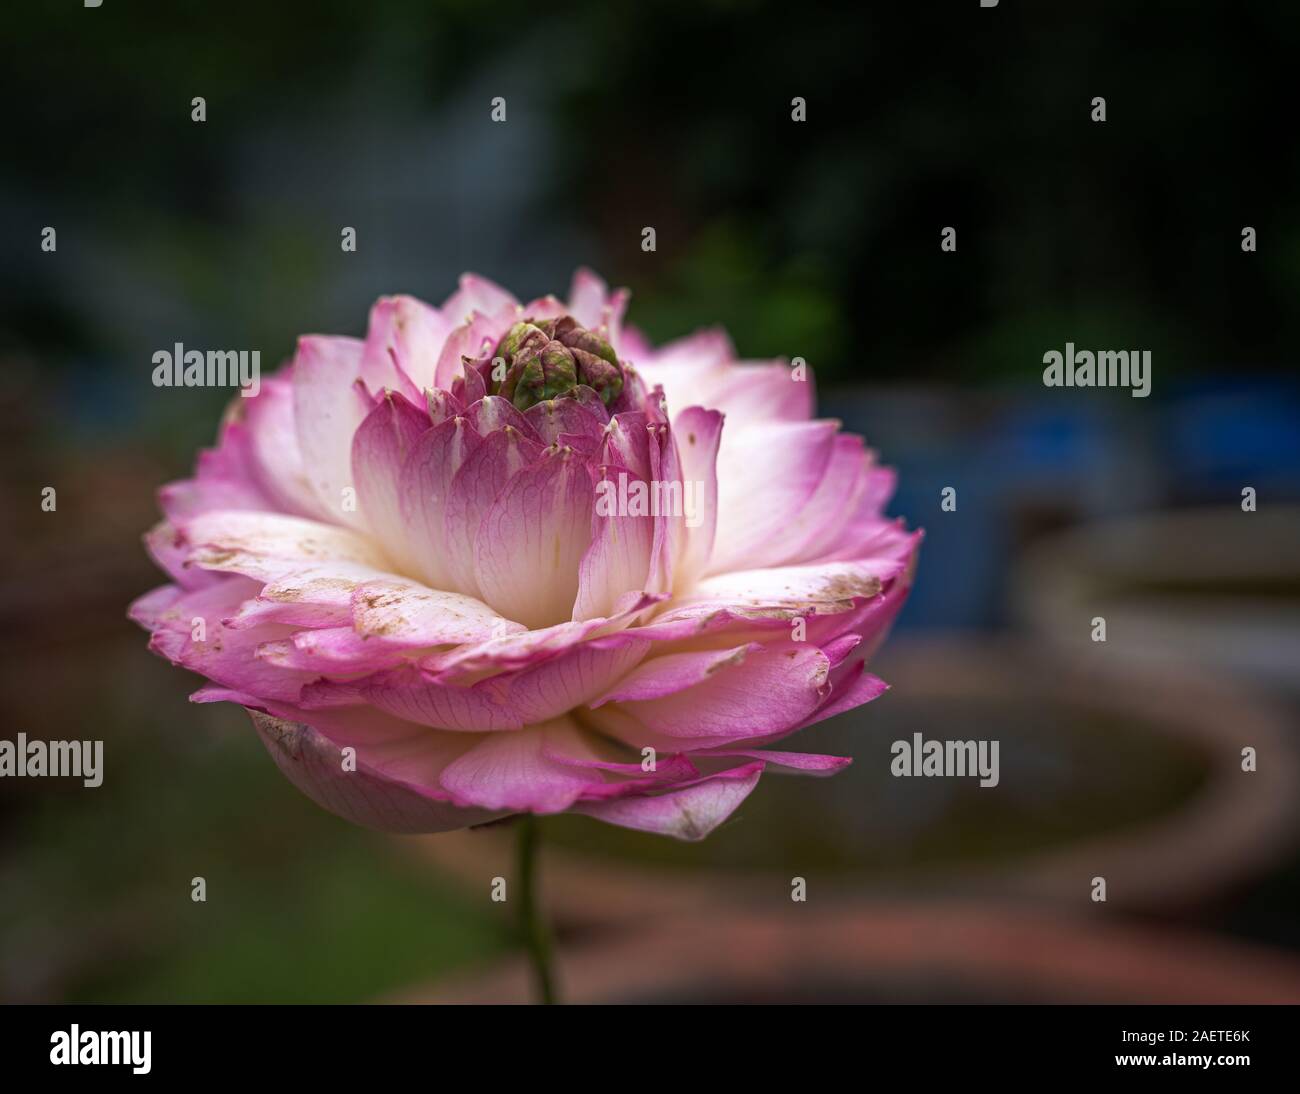 shot of an Isolated rustic bloomed pink lotus flower in green background  Stock Photo